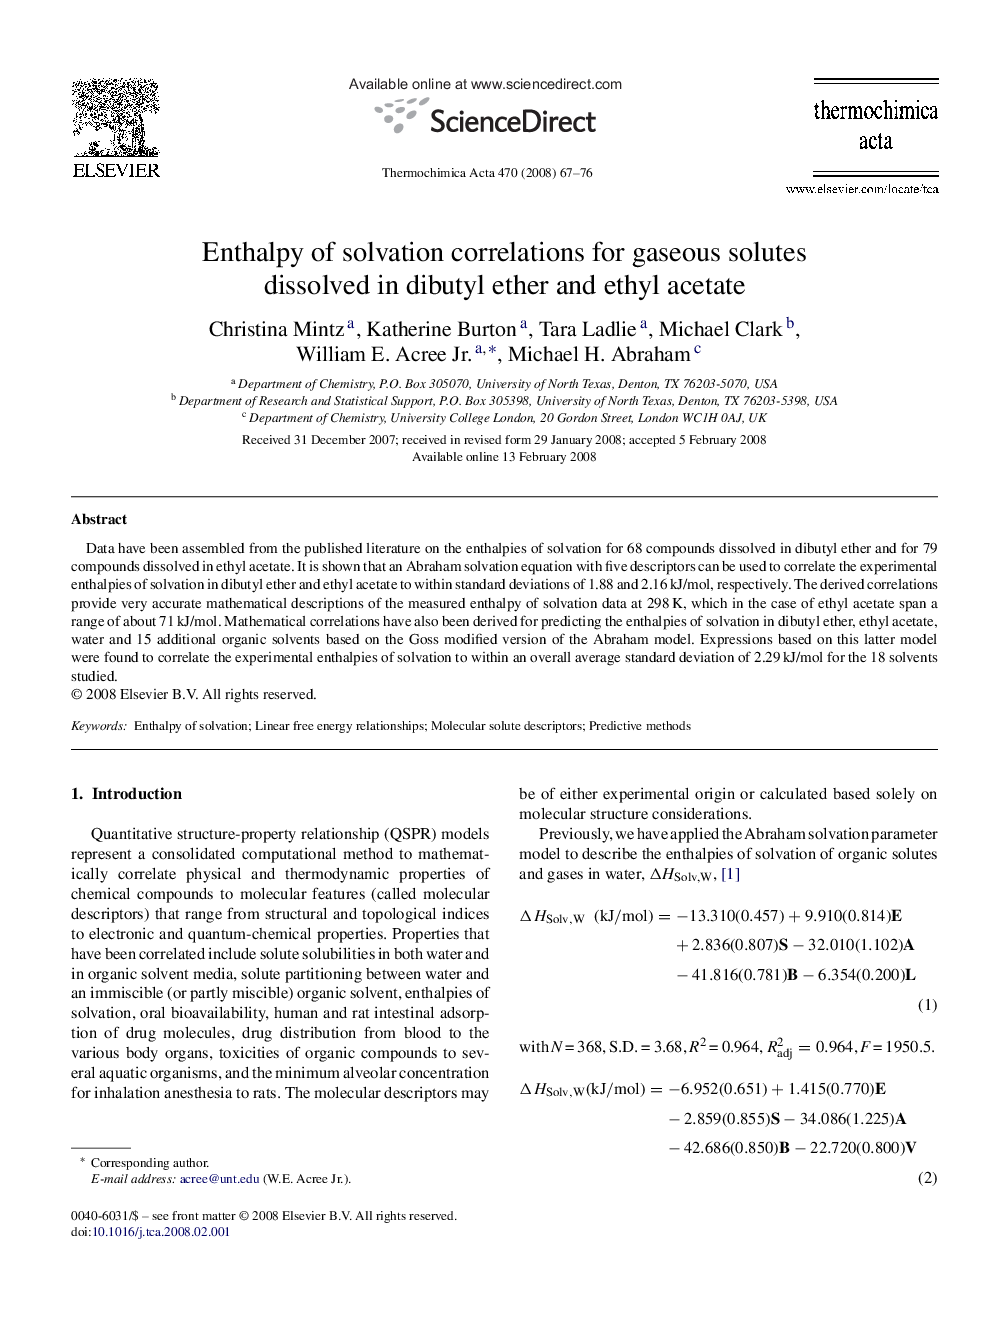 Enthalpy of solvation correlations for gaseous solutes dissolved in dibutyl ether and ethyl acetate